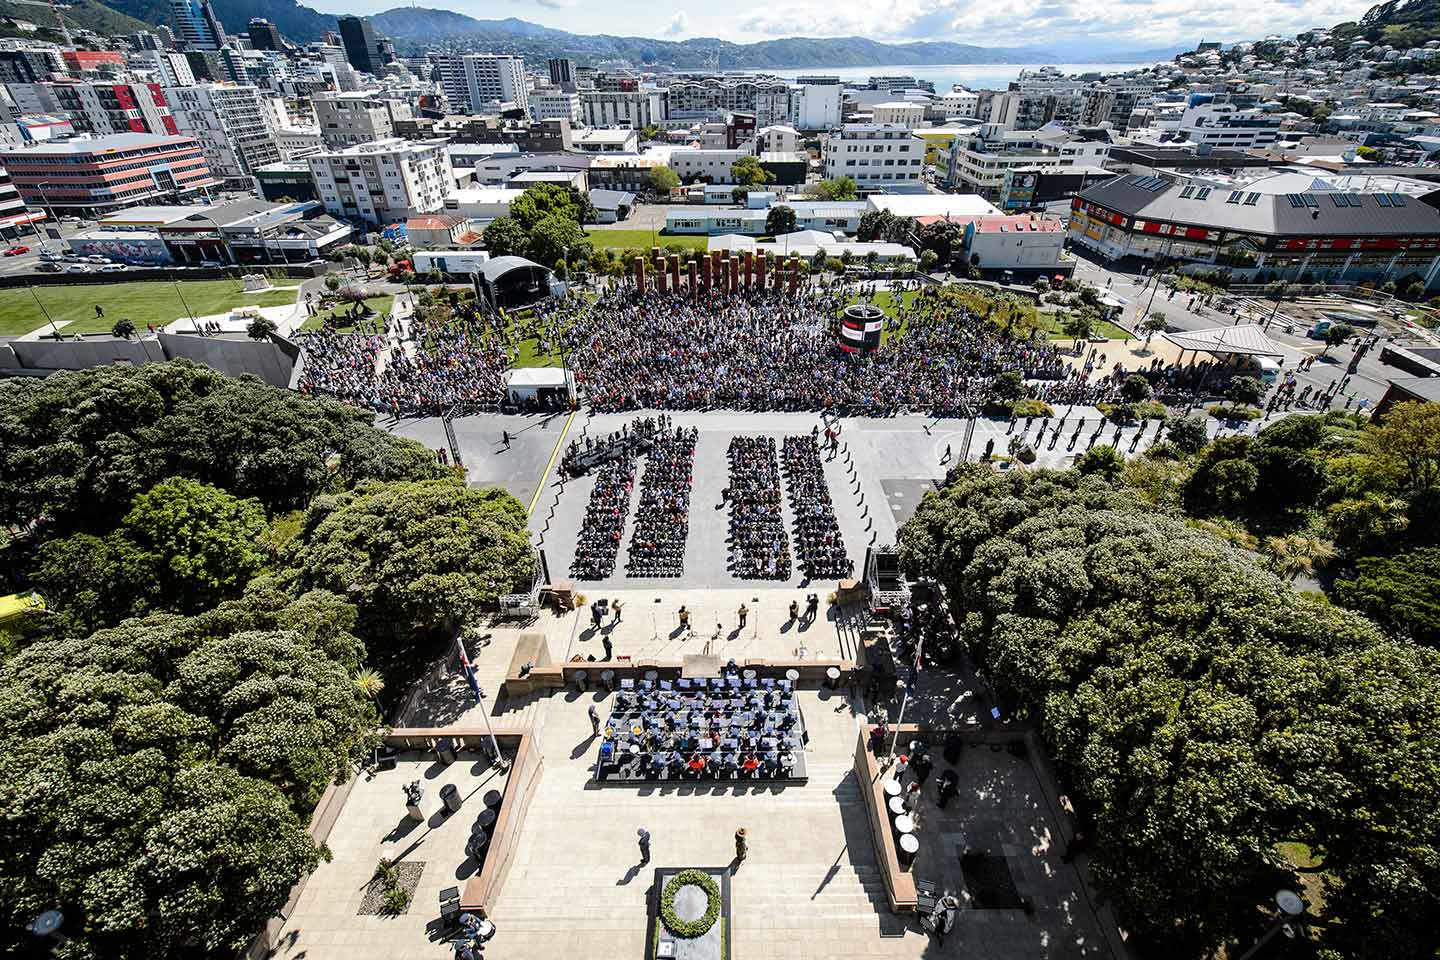 A view from the top of the Carillon tower looking out over Pukeahu park and Wellington on Armistice Day. There is a large group of people on the lawn and on the steps of the Memorial.